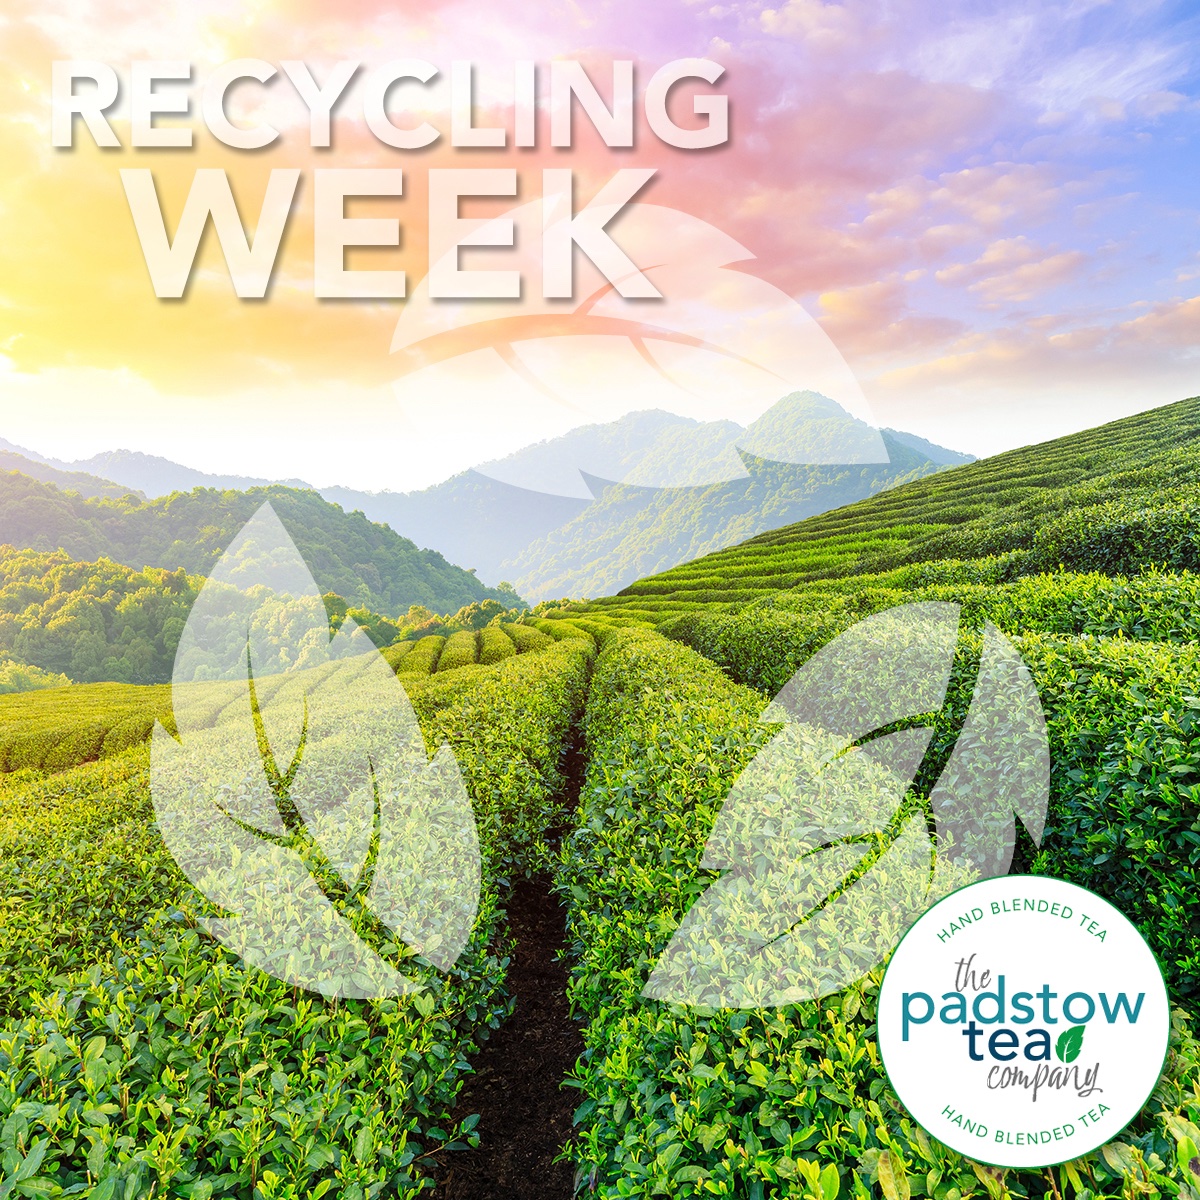 The 20th national #Recycling Week sees the inaugural Recycling Summit, with the sole purpose of motivating the public to #recycle more & more often
#Tea #infusions #biodegradeable #teabags #environment #wastemanagement #sustainable thepadstowteacompany.co.uk/environment